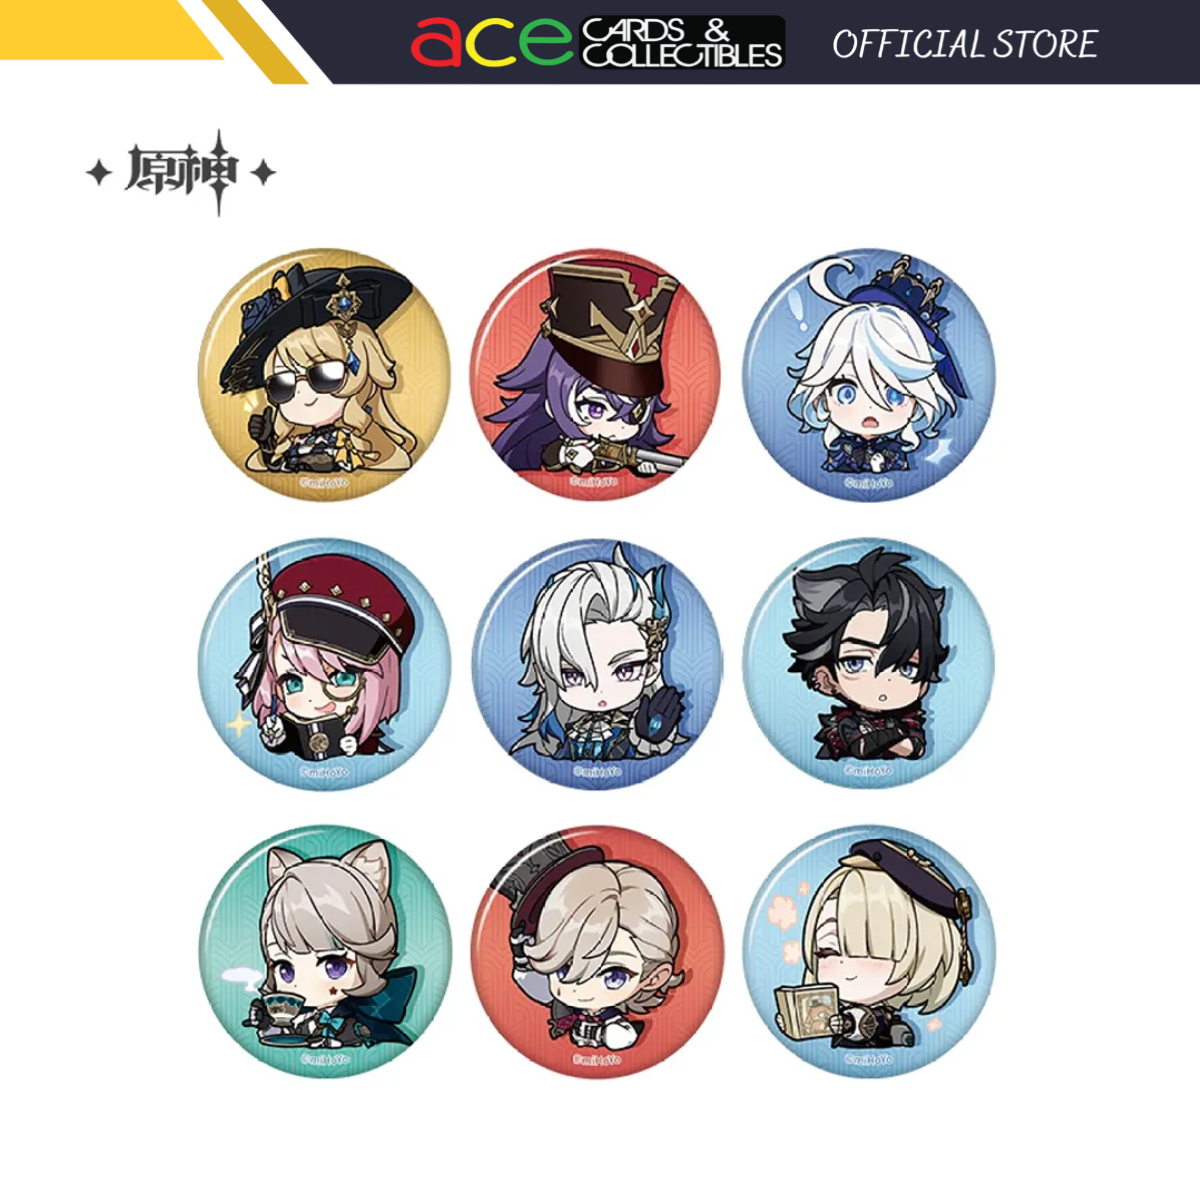 miHoYo Genshin Impact Chibi Fontaine Character Expression Sticker Badge-Navia-miHoYo-Ace Cards &amp; Collectibles